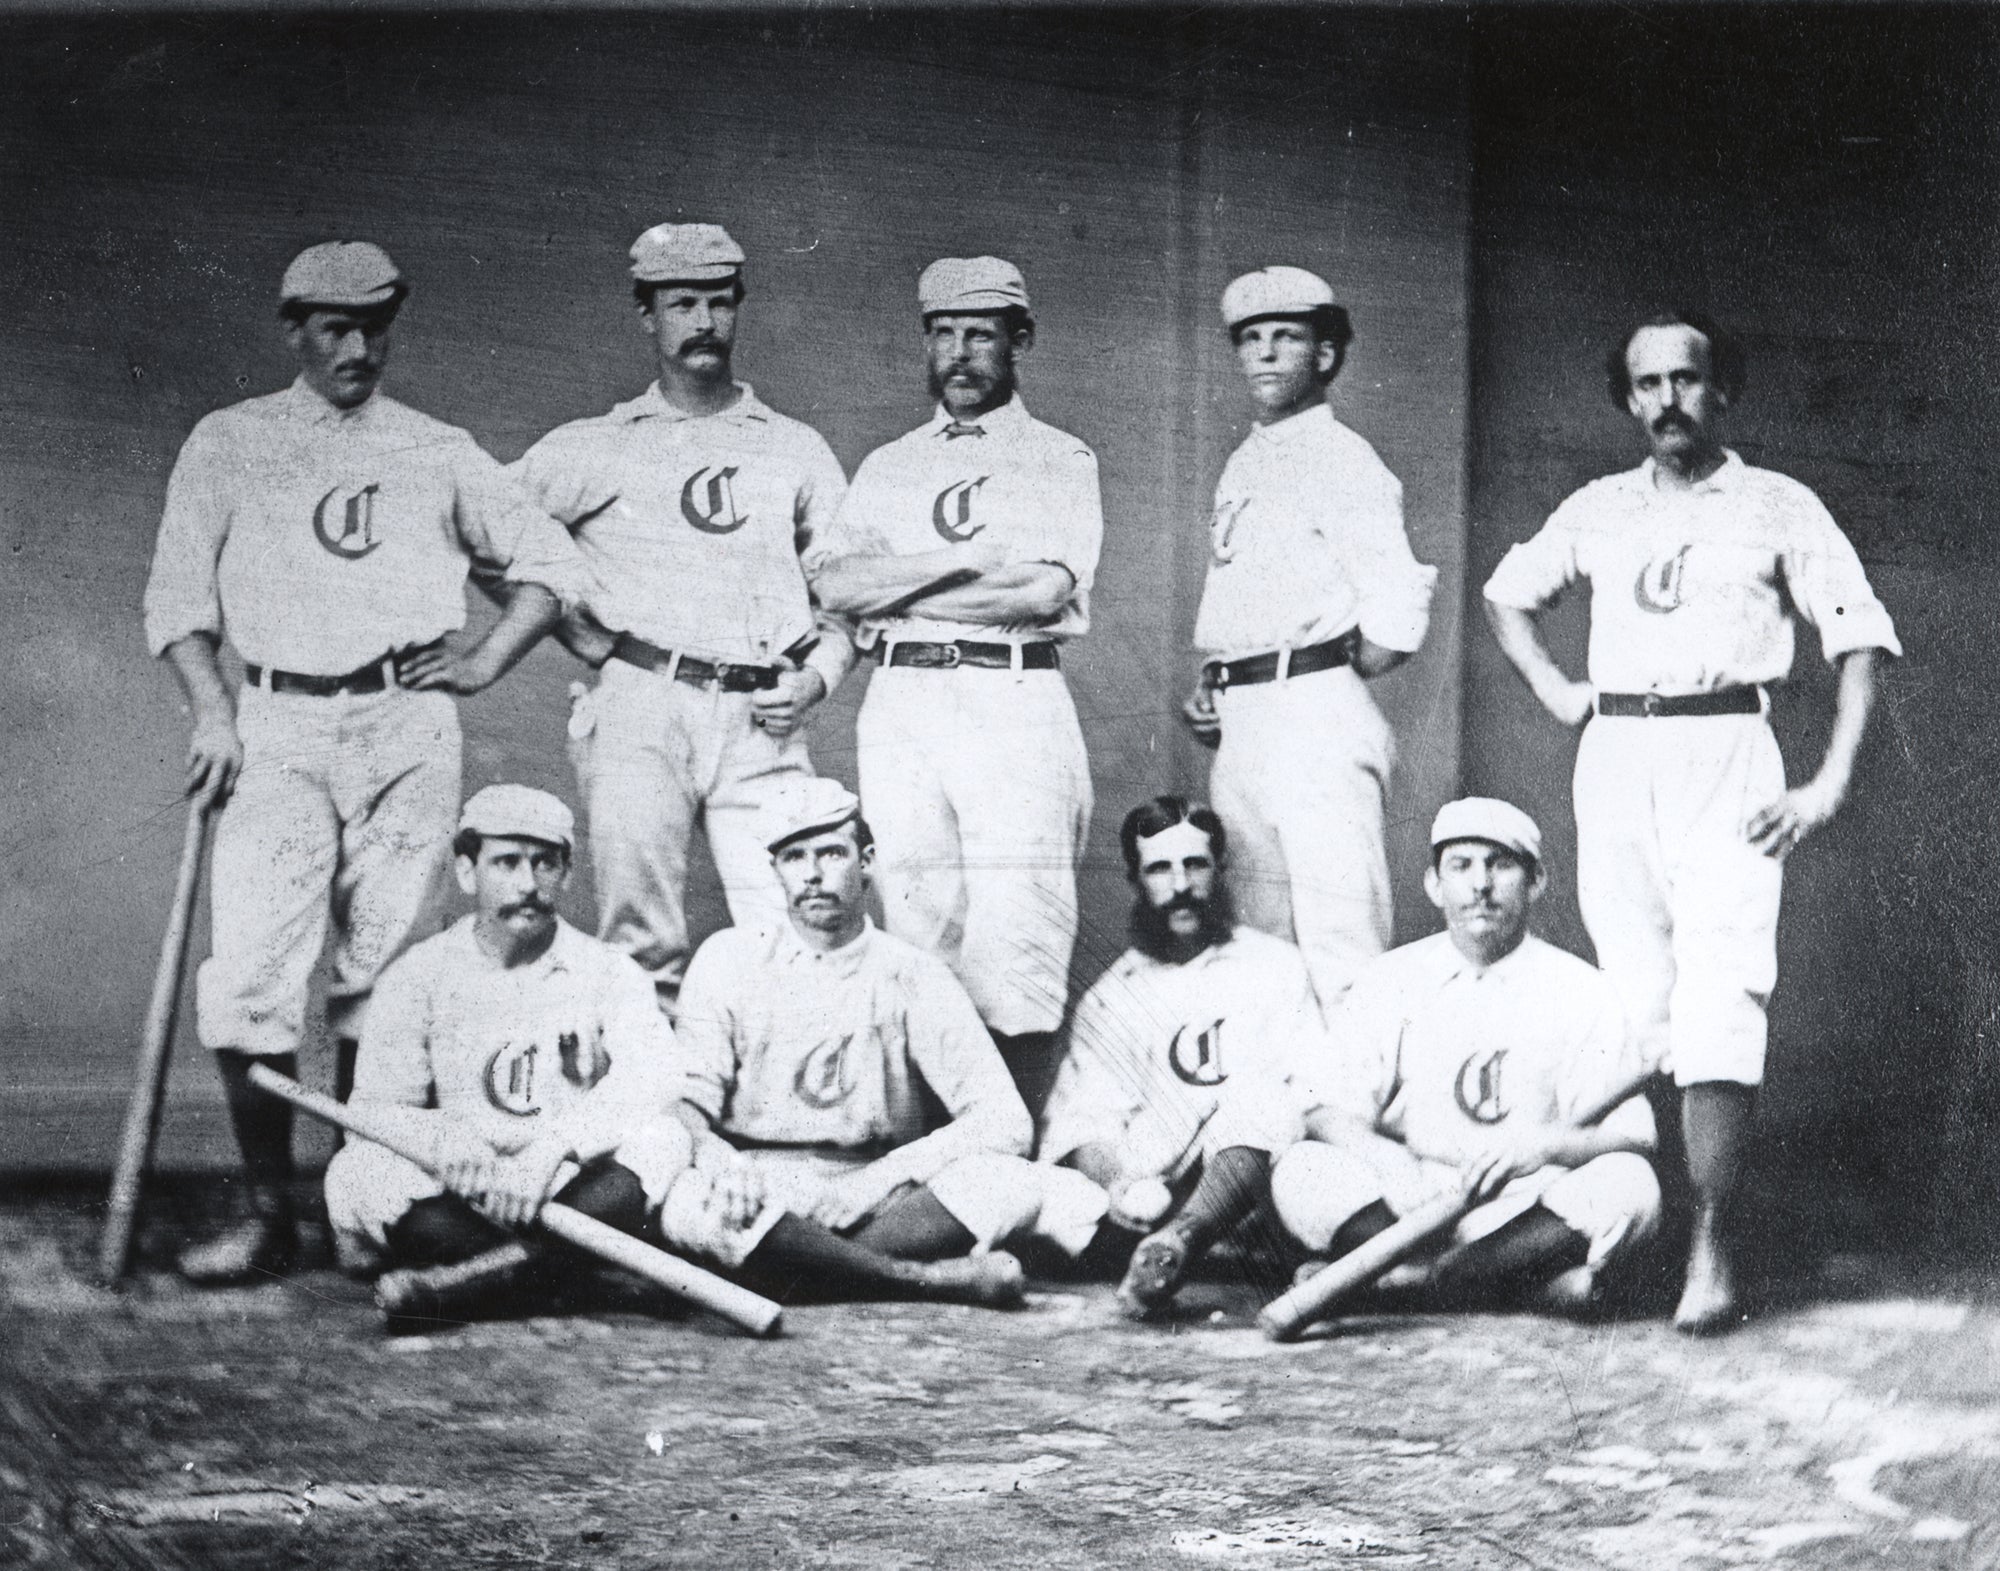 Trips by the 1869 Cincinnati team made the game famous